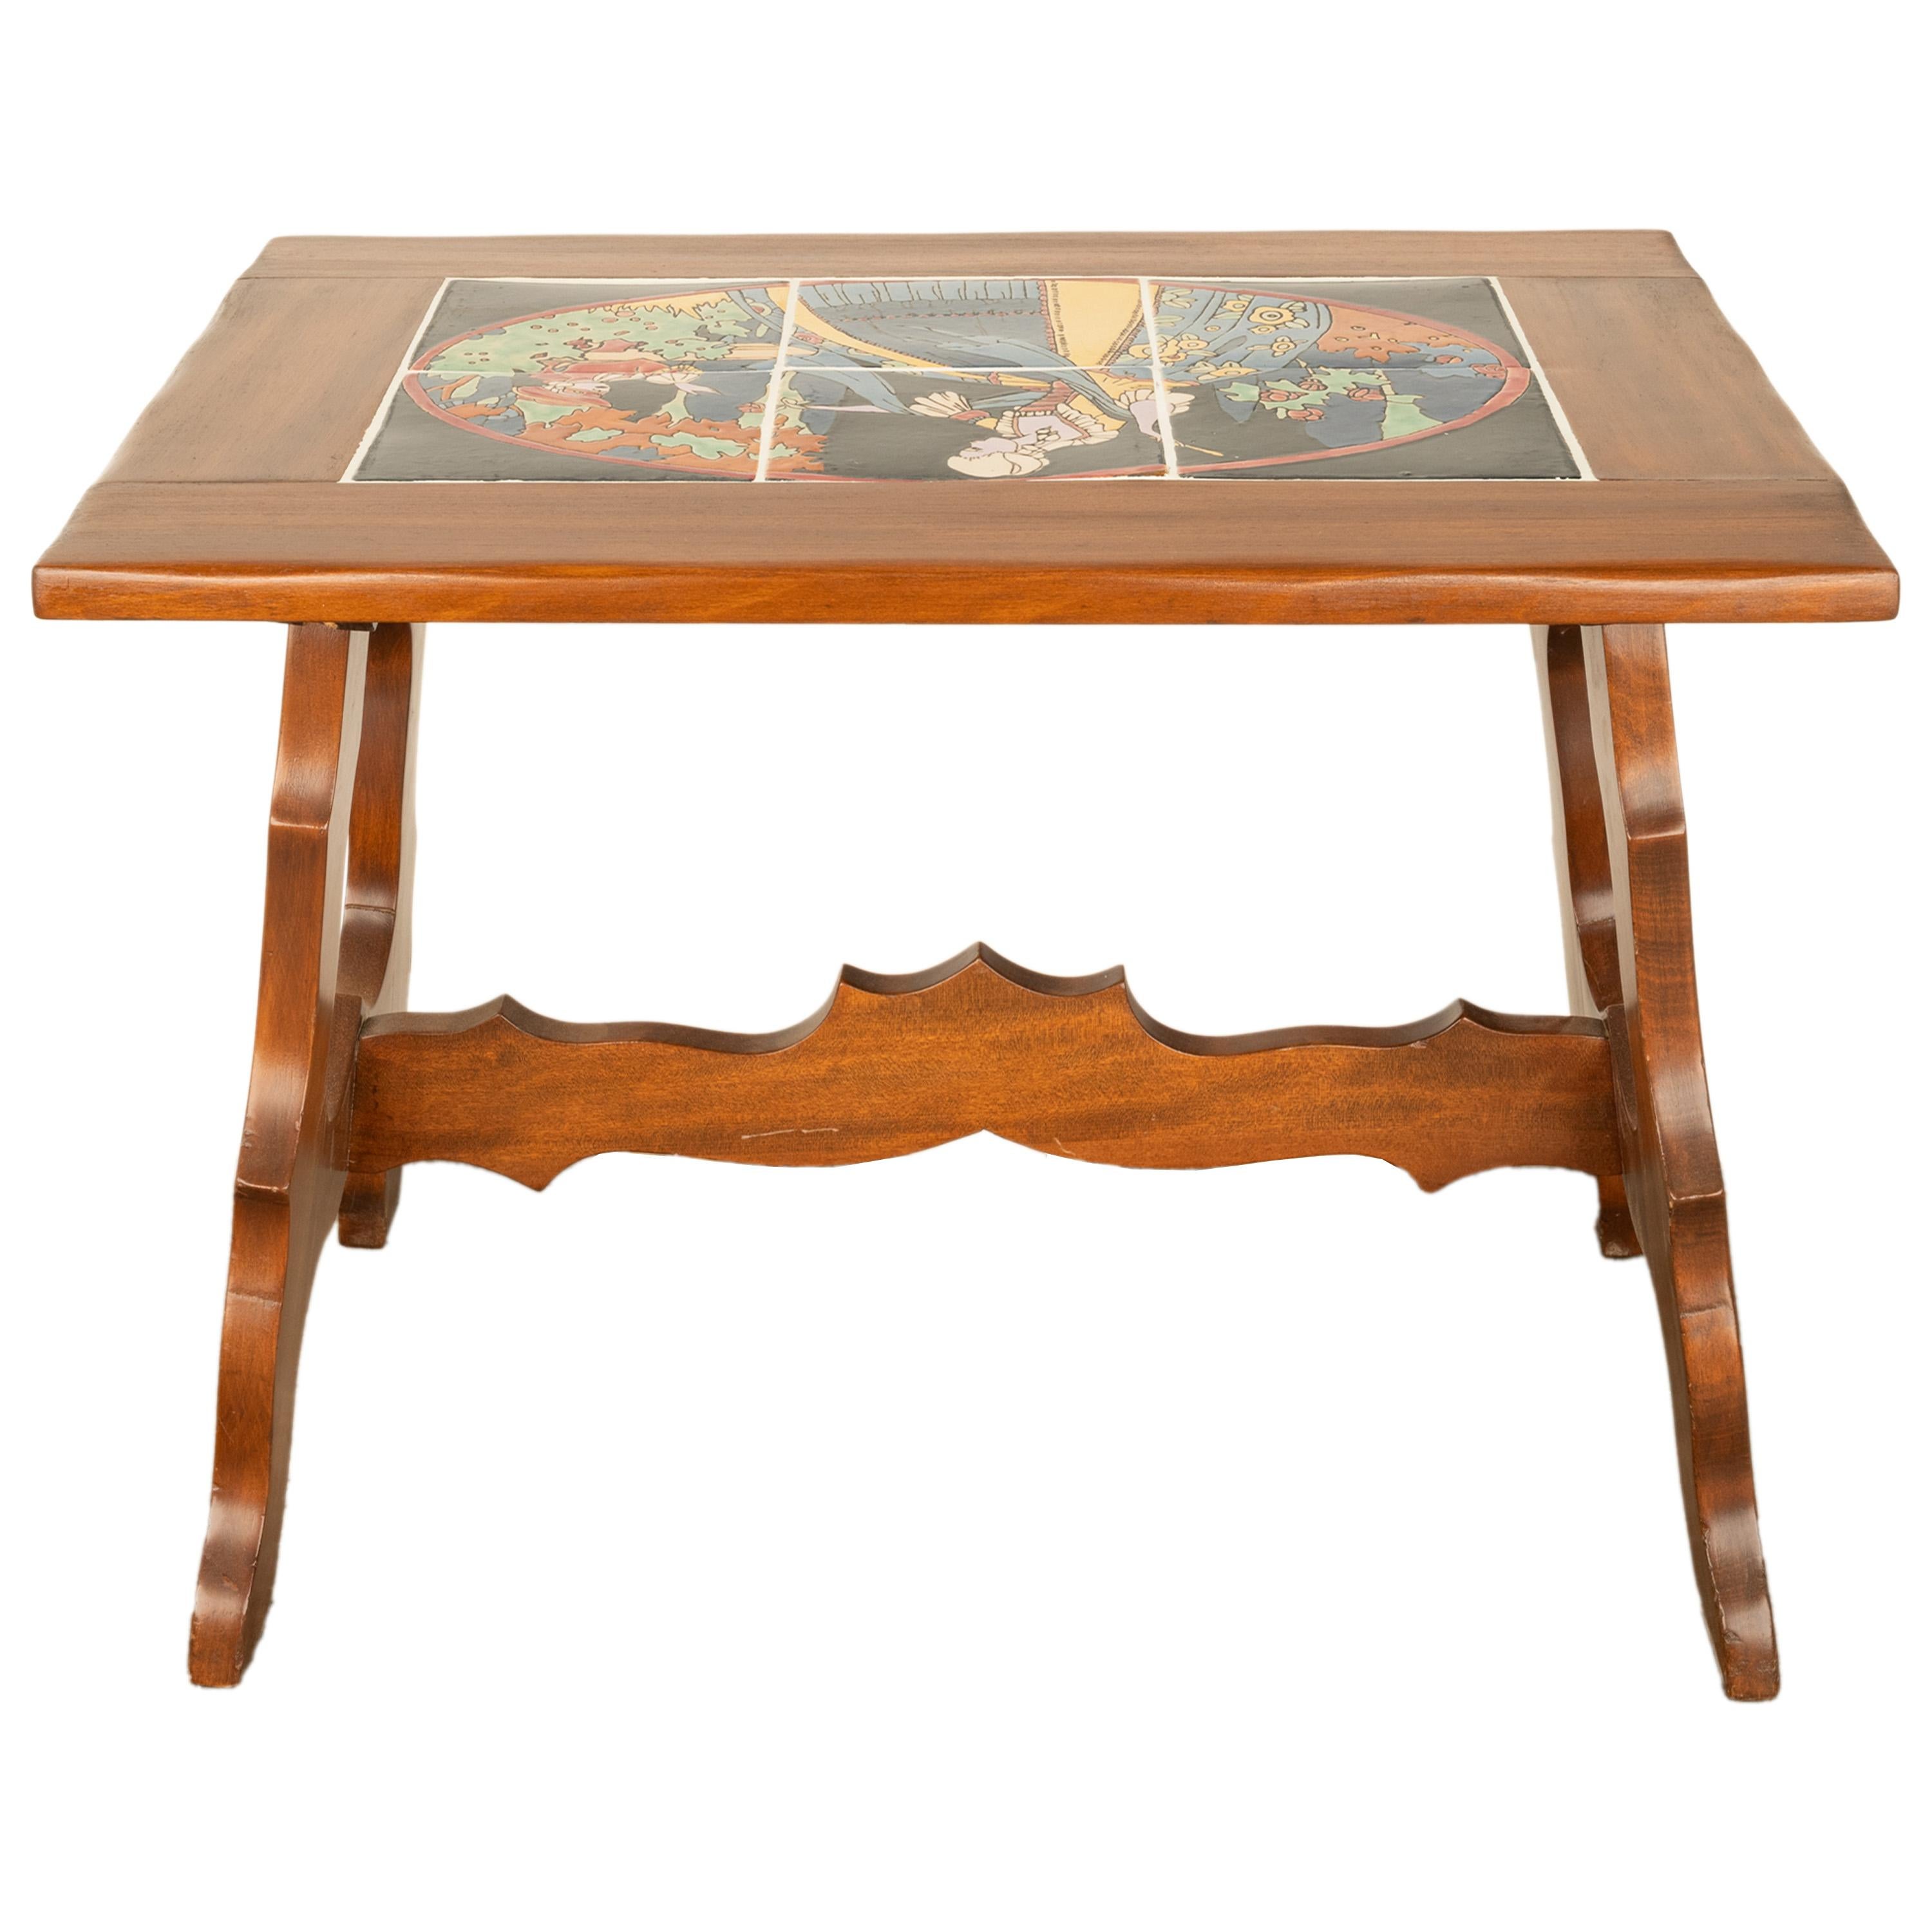 Antique Mission Catalina Monterrey California Tile Top Walnut Coffee Table 1930 For Sale 7